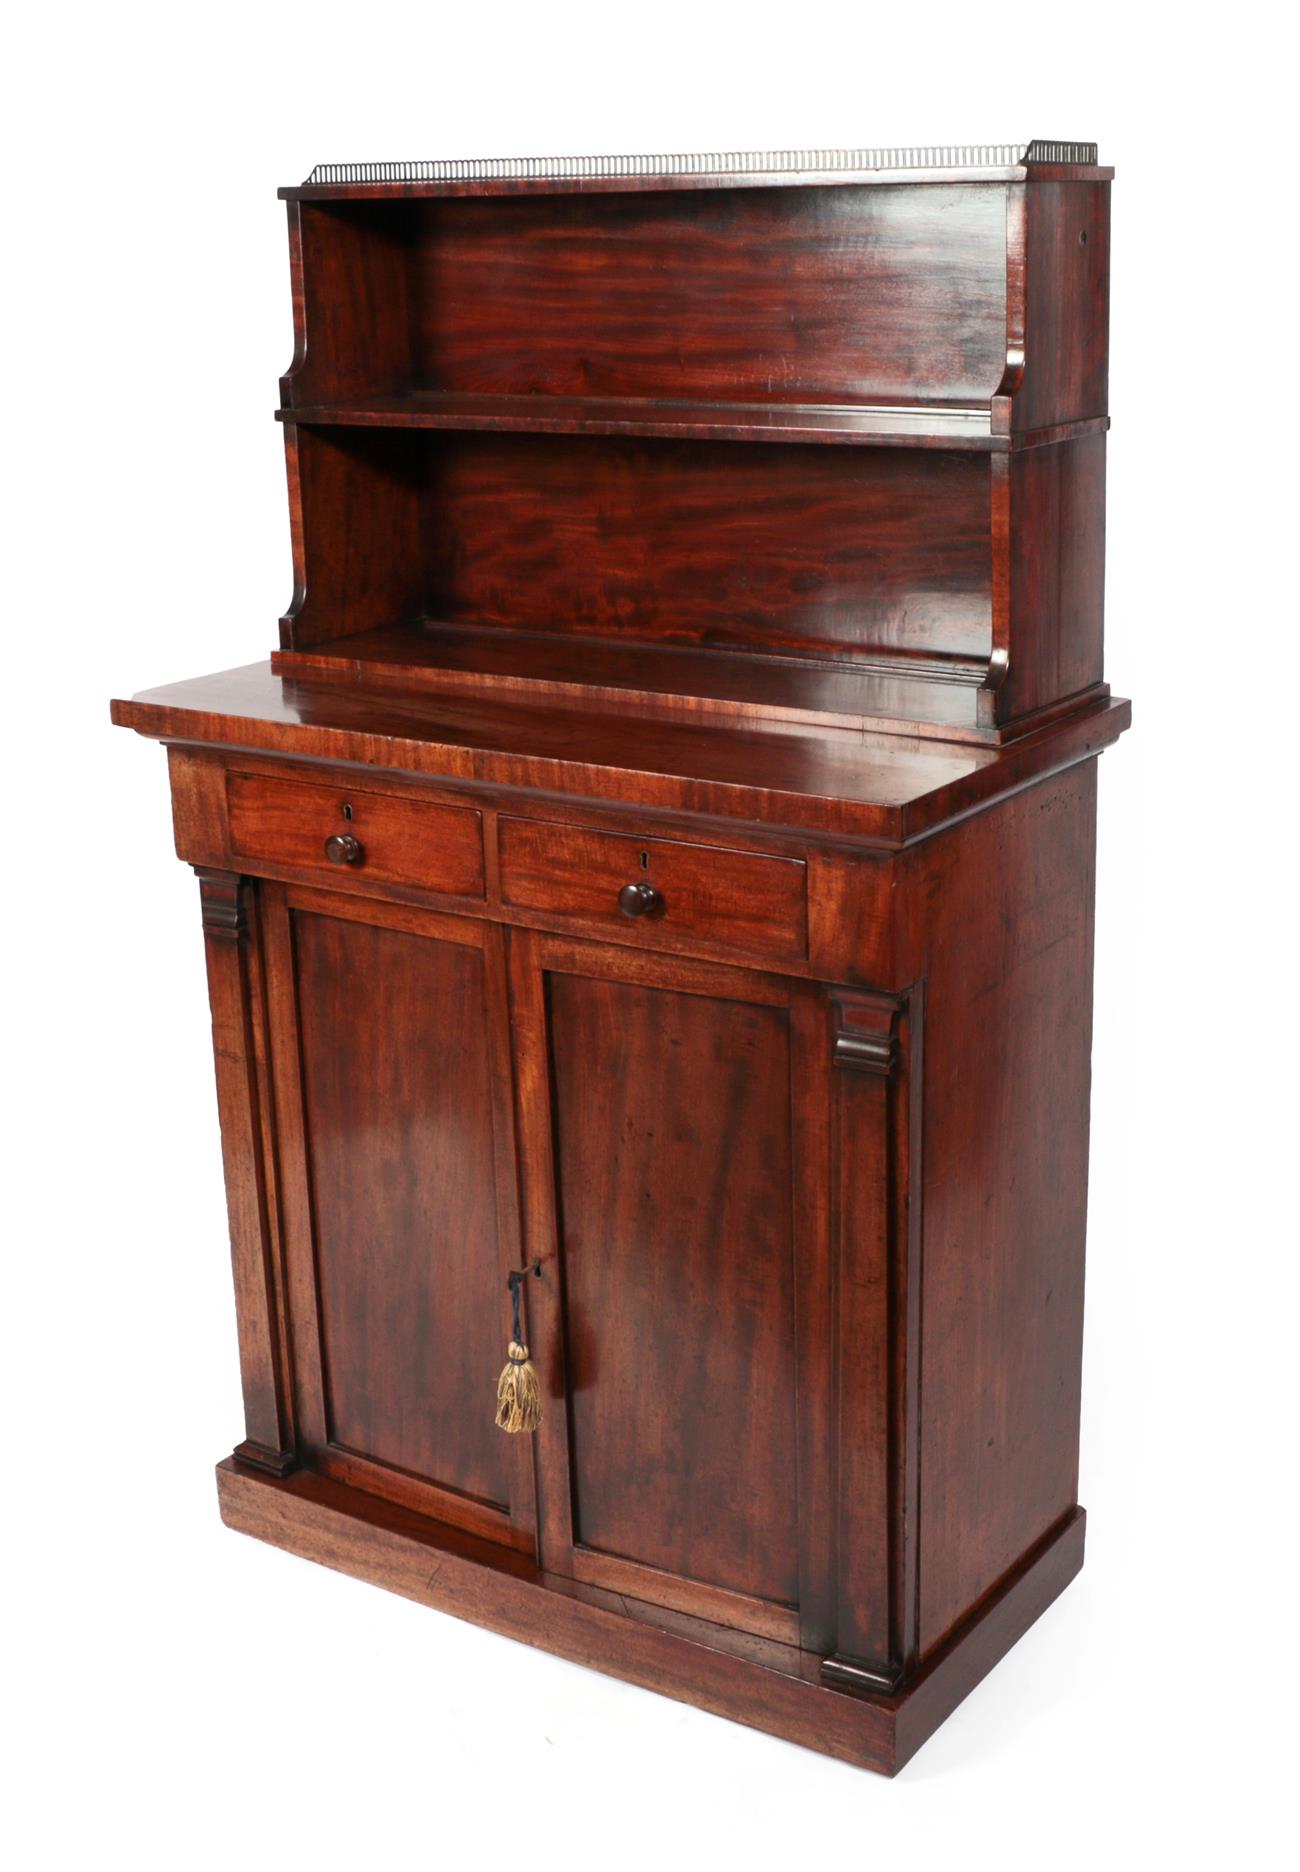 A Mahogany Chiffonier, 2nd quarter 19th century, the upper section with a pierced three-quarter